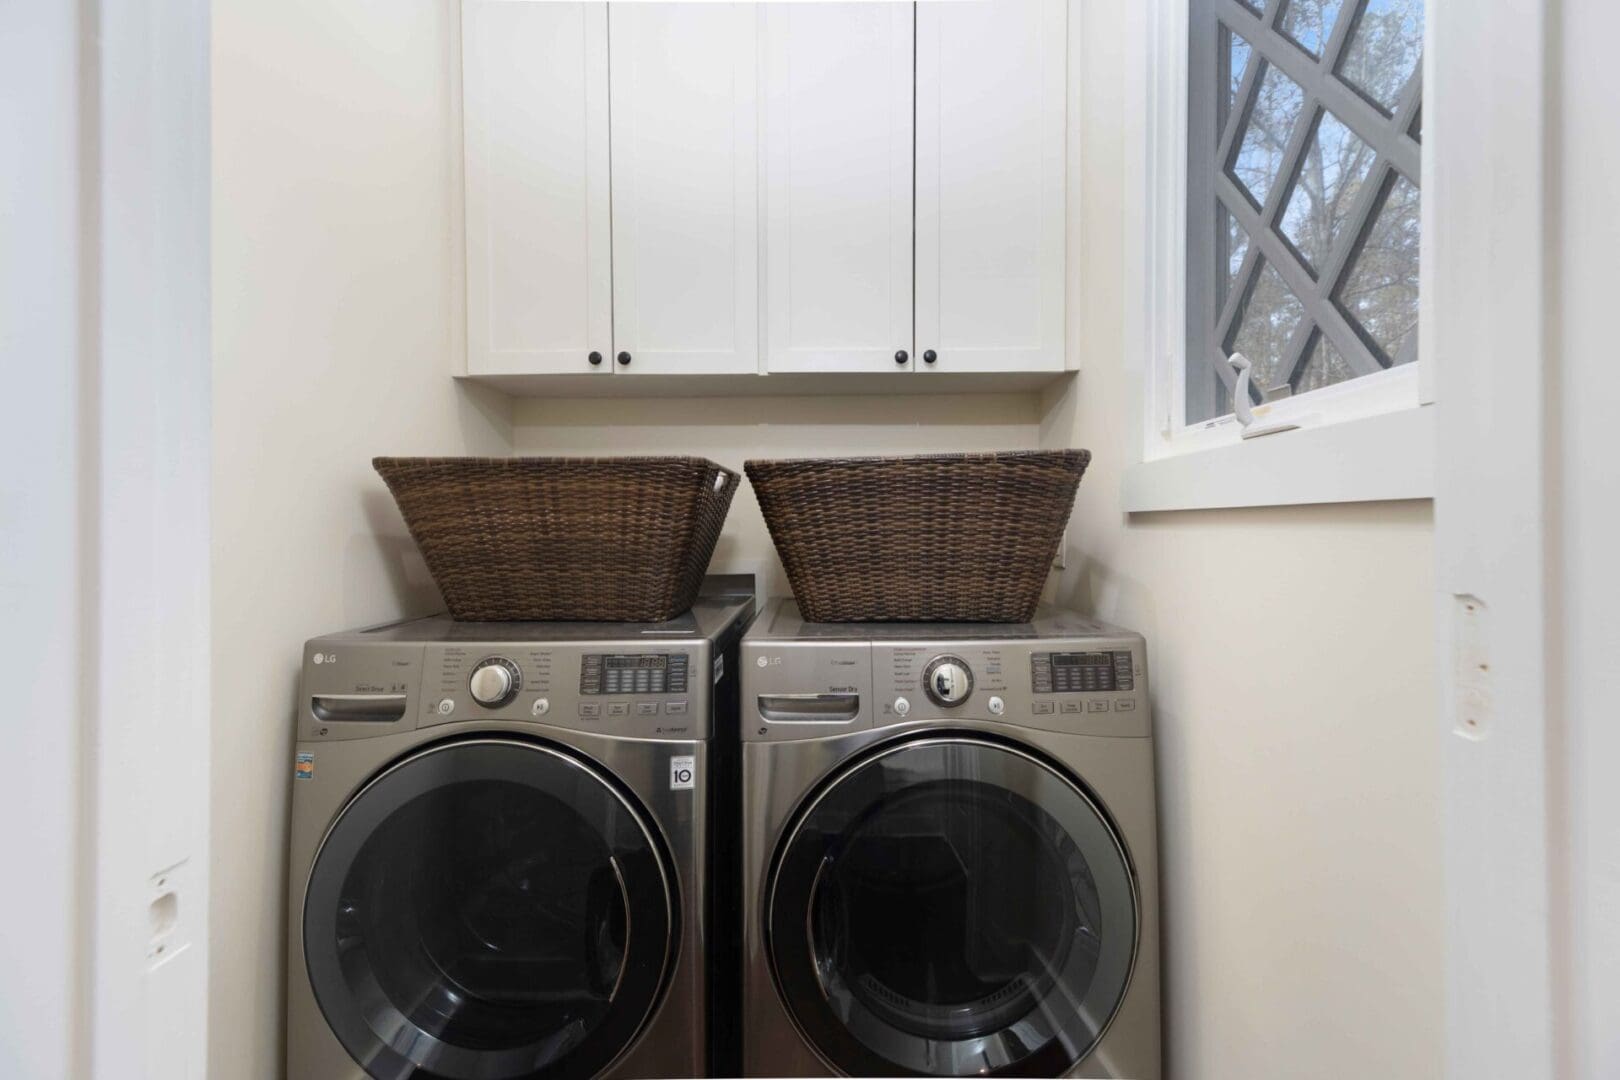 A pair of washing machines in a laundry room.